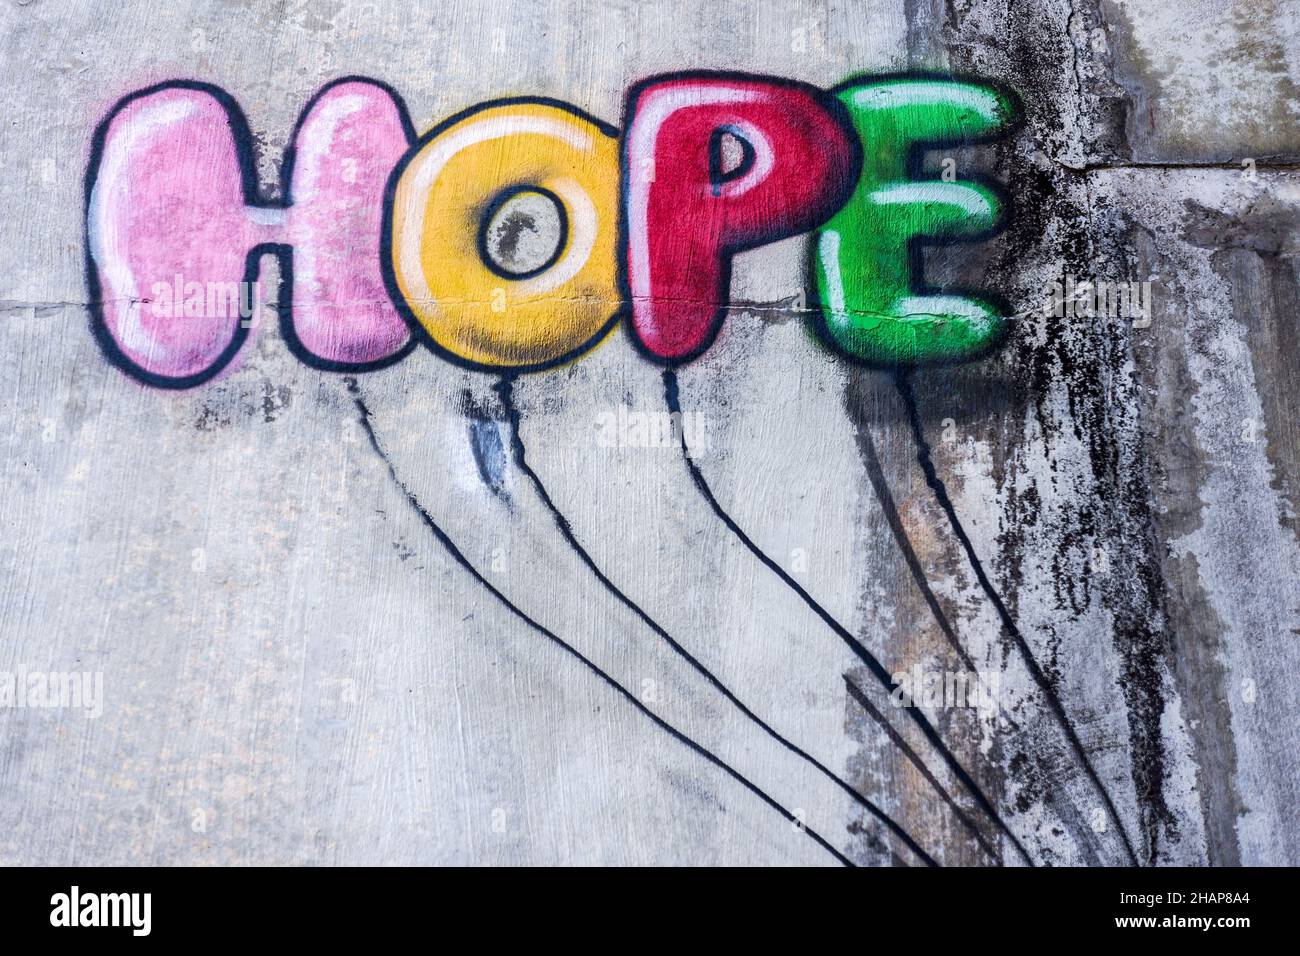 graffiti words on the wall depicting the word hope in balloon like letters. Stock Photo